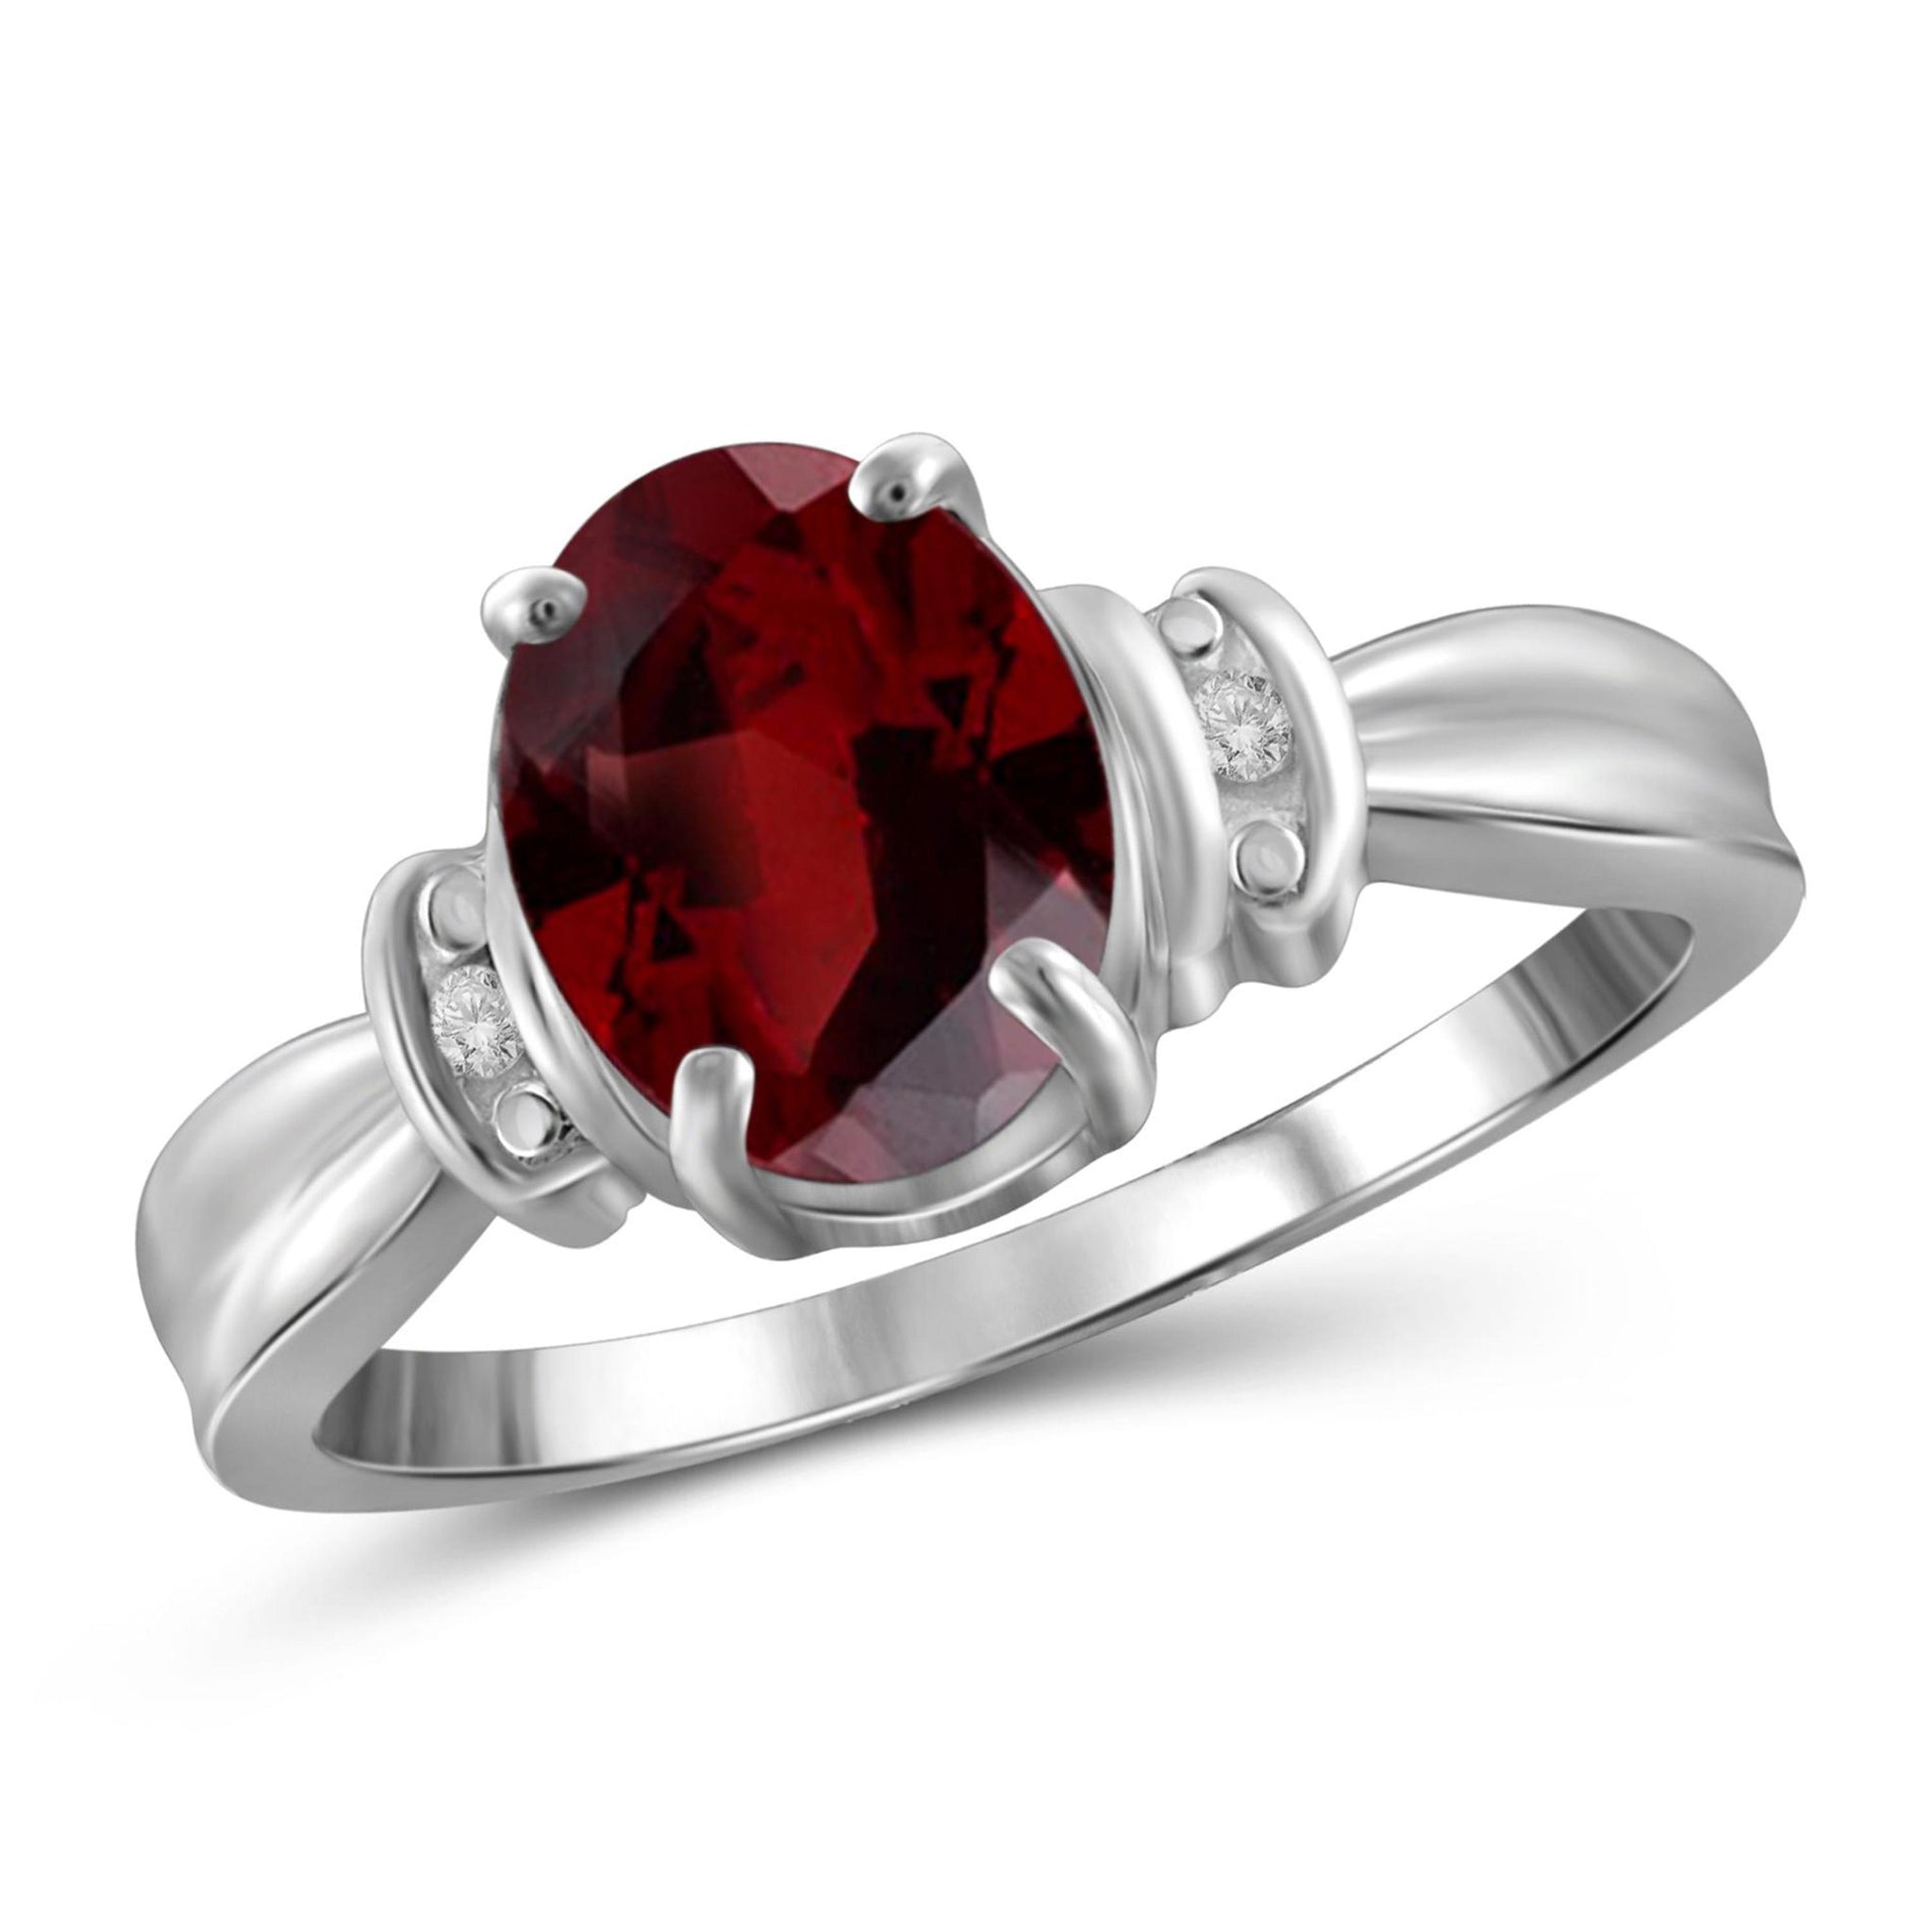 JewelonFire 2.15 Carat T.G.W. Garnet and White Diamond Accent Sterling Silver Ring - Assorted Colors